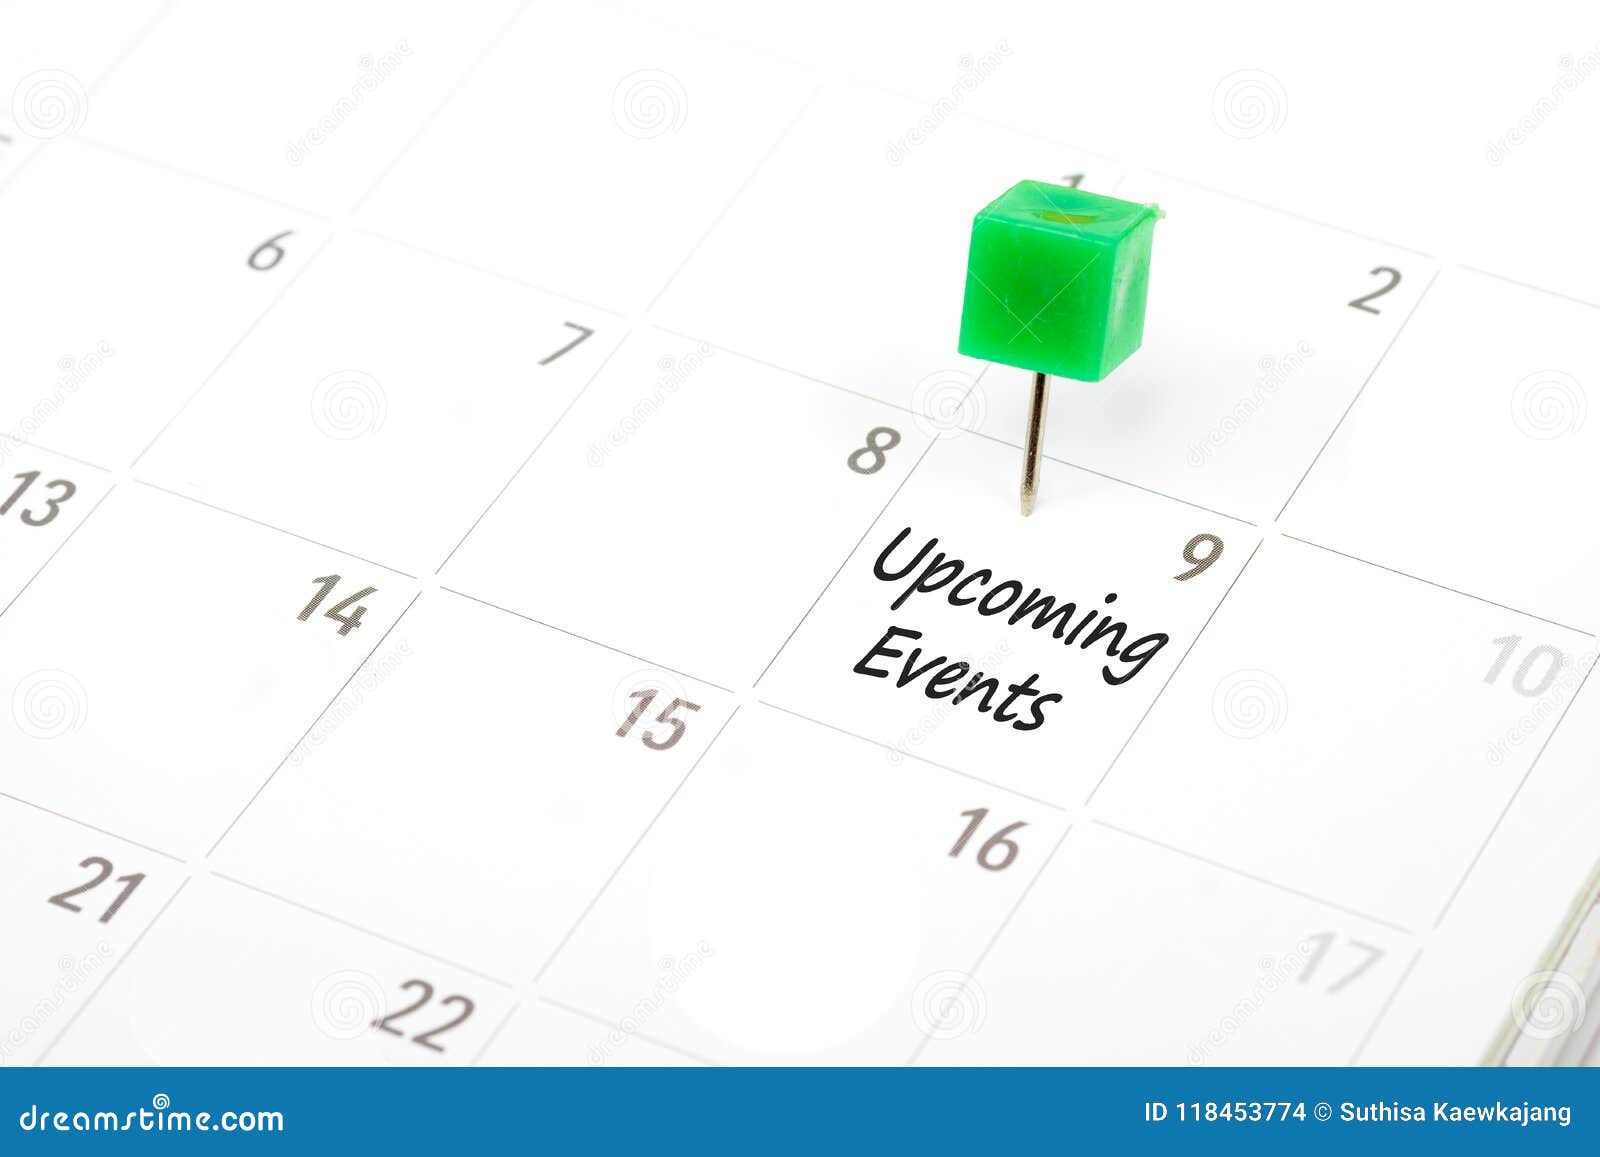 upcoming events written on a calendar with a green push pin to r